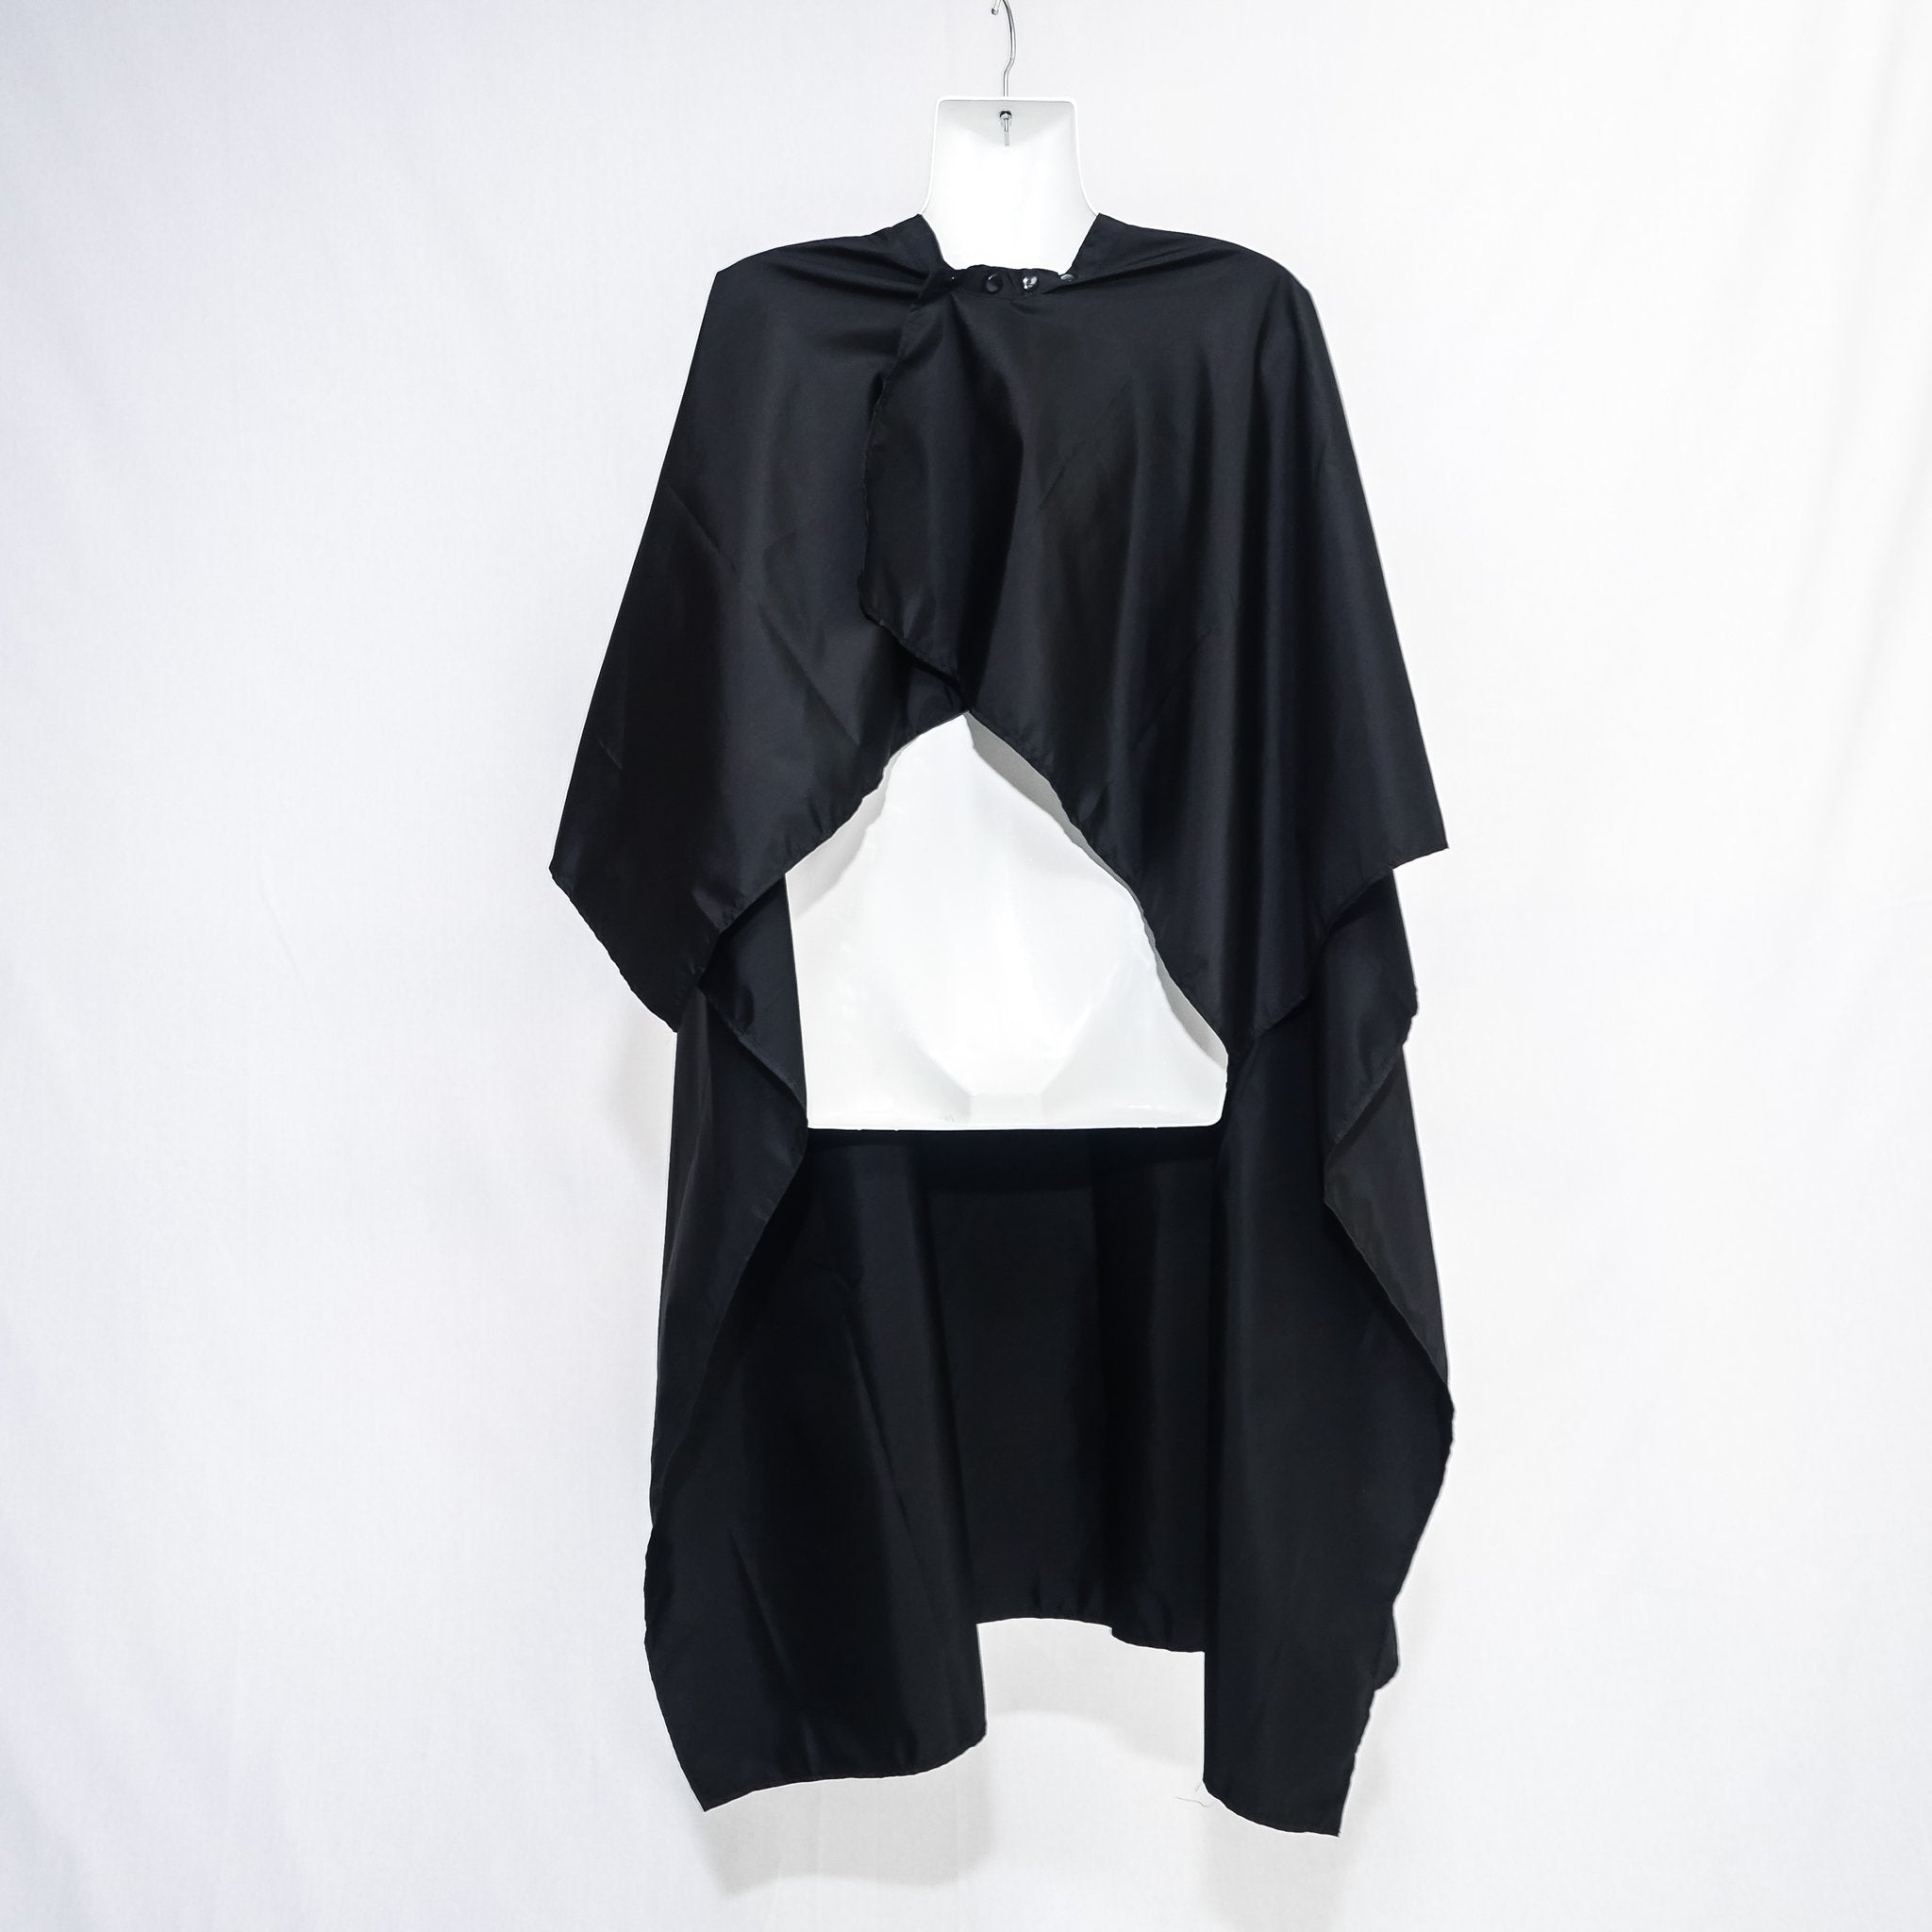 SSS Black Polyester Cape 100% Waterproof with Studs 301 – Southern ...